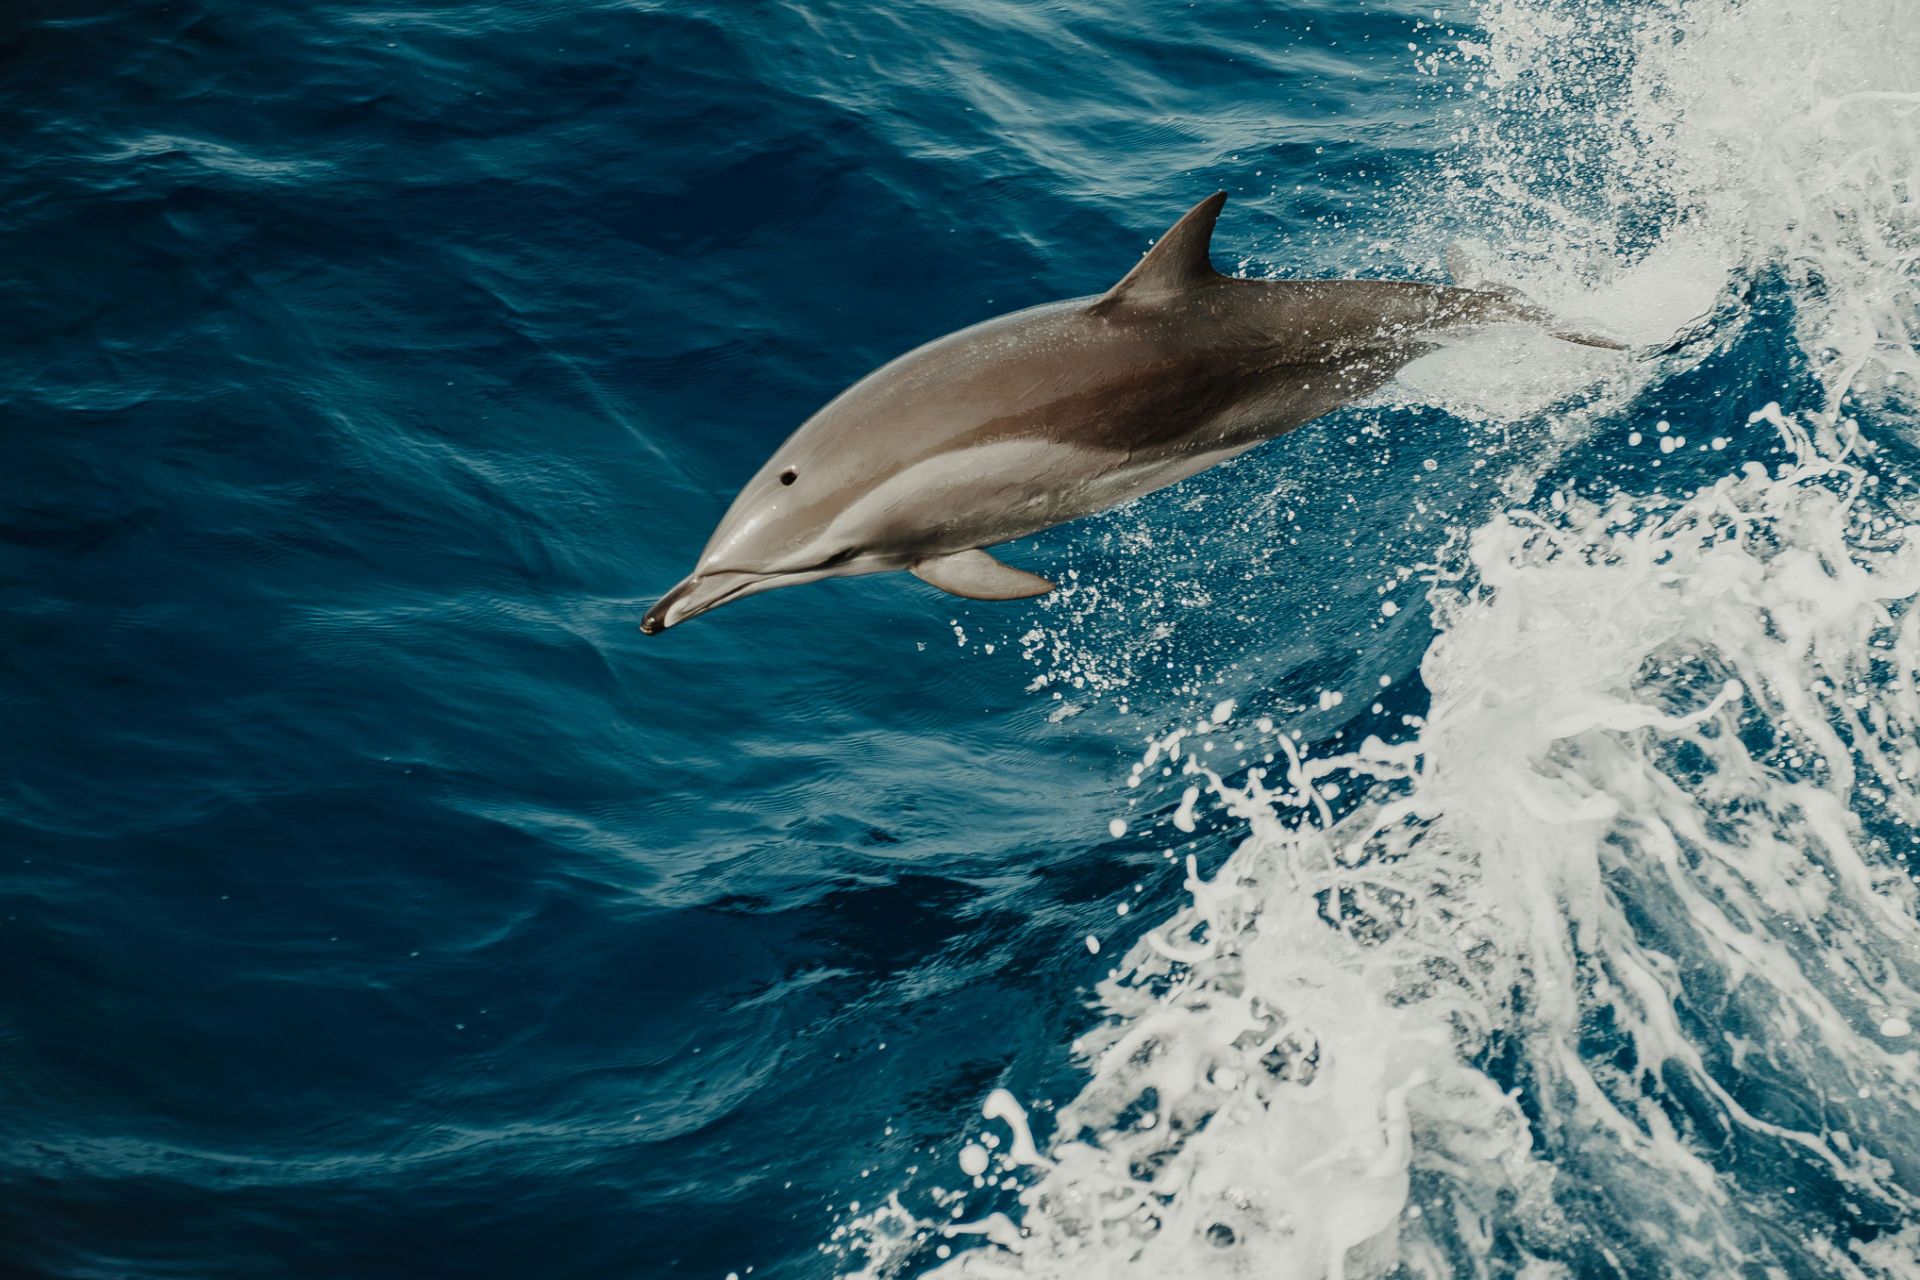 Make your images load fast - like this dolphin swimming quickly